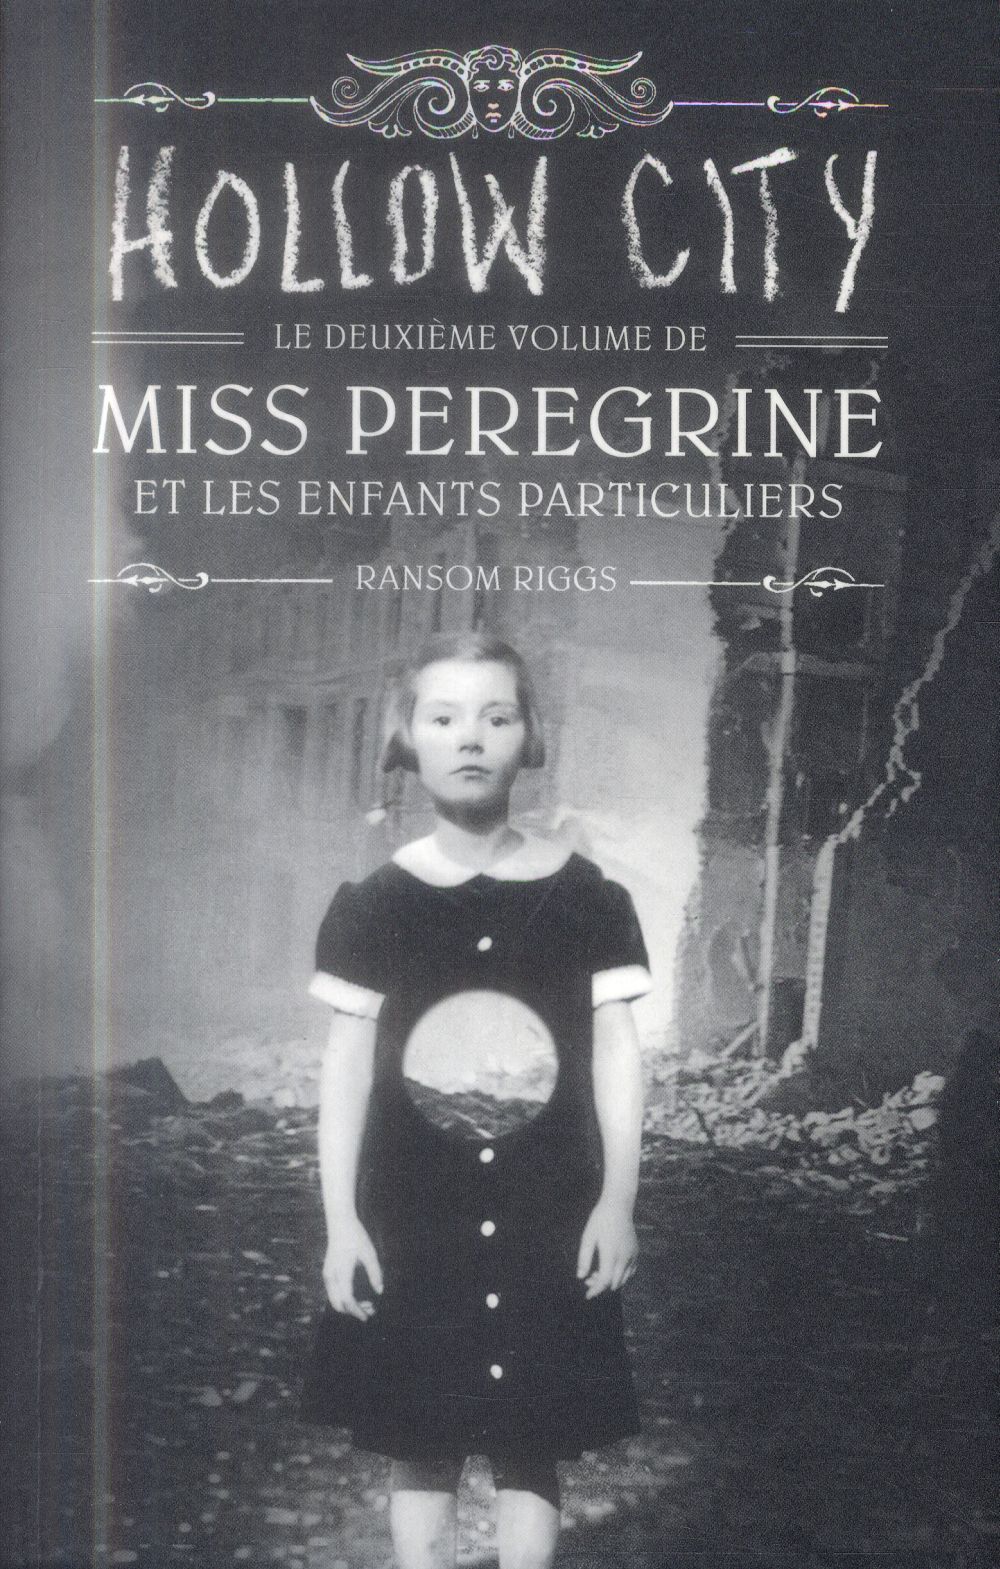 MISS PEREGRINE, TOME 02 - HOLLOW CITY